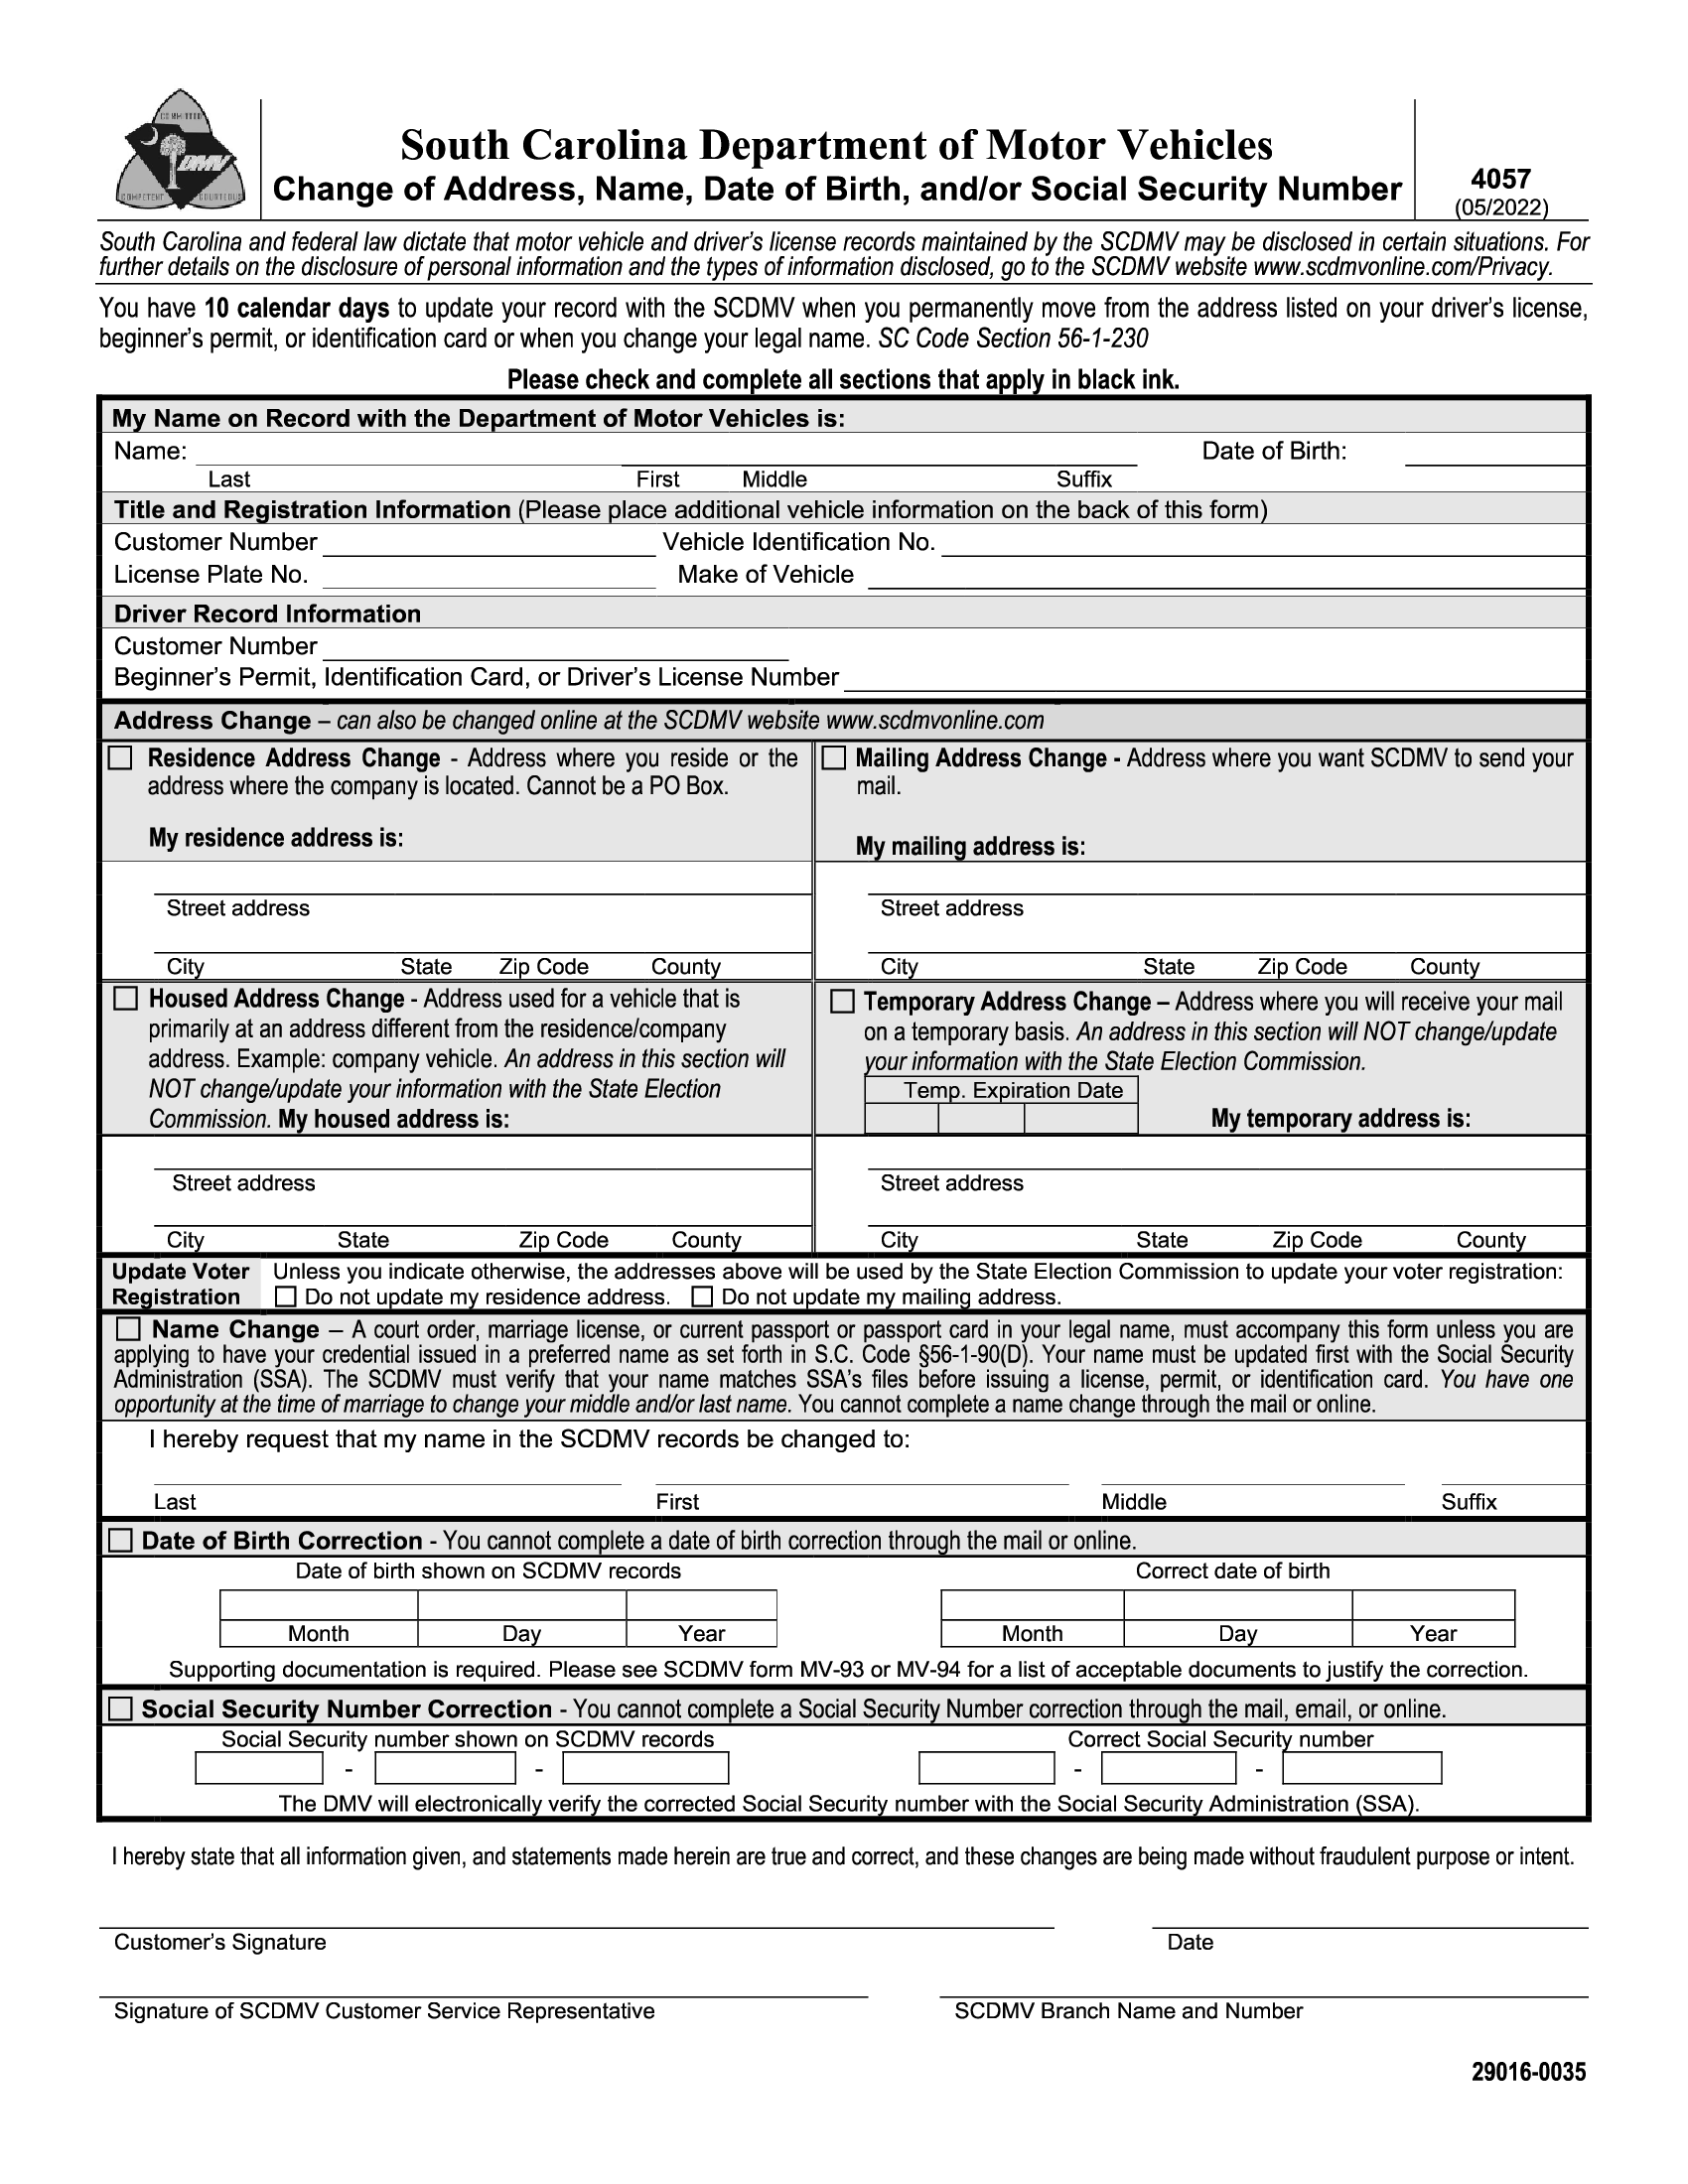 SCDMV Form 4057. Change of Address, Name, Date of Birth, and/or Social